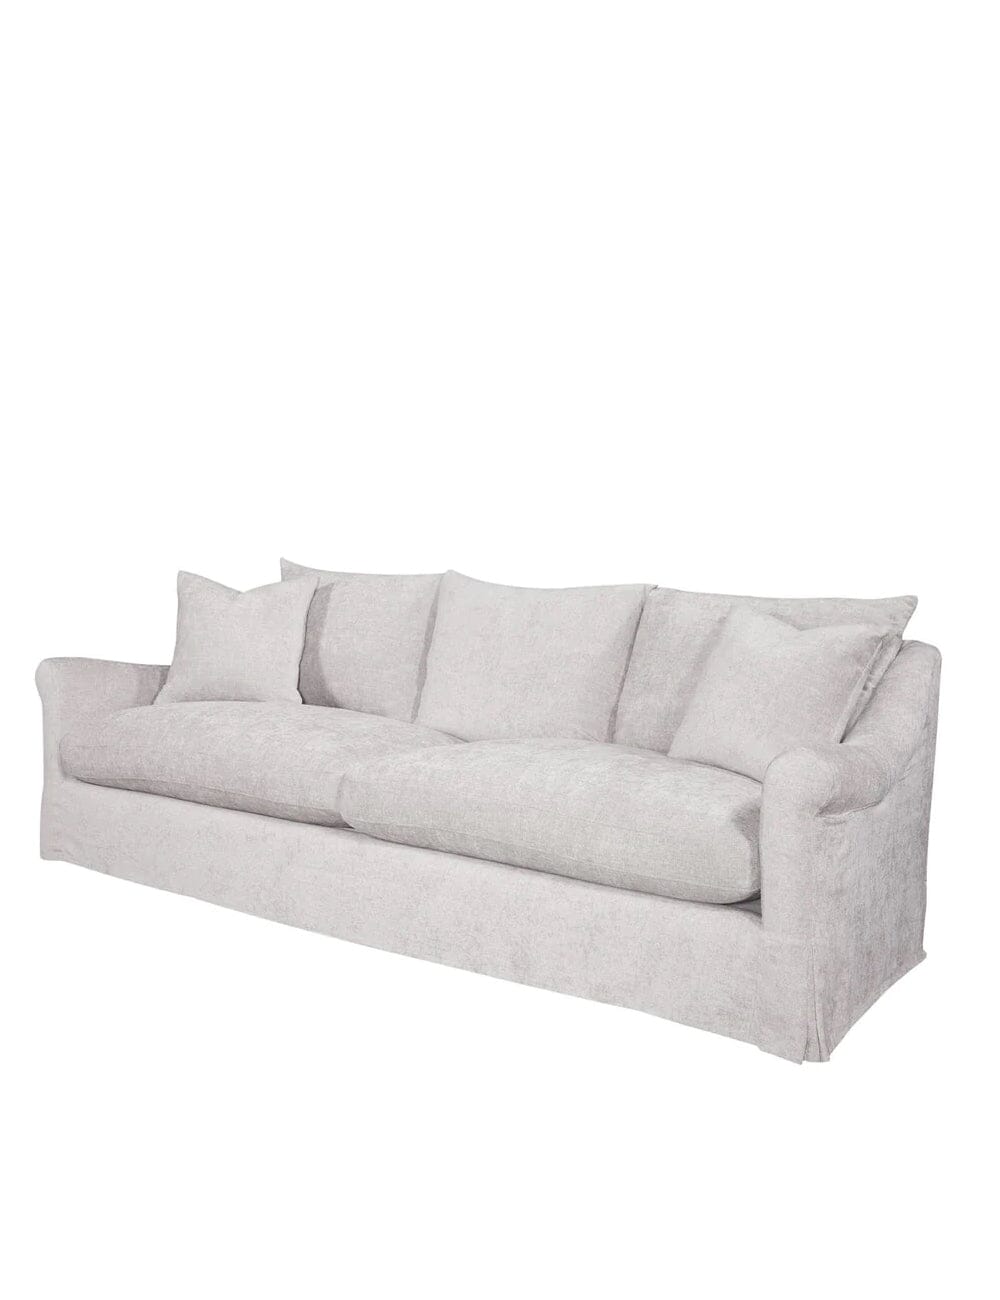 Antioch 104" Performance Slipcover Sofa by Huck & Peck SOFA Huck and Peck